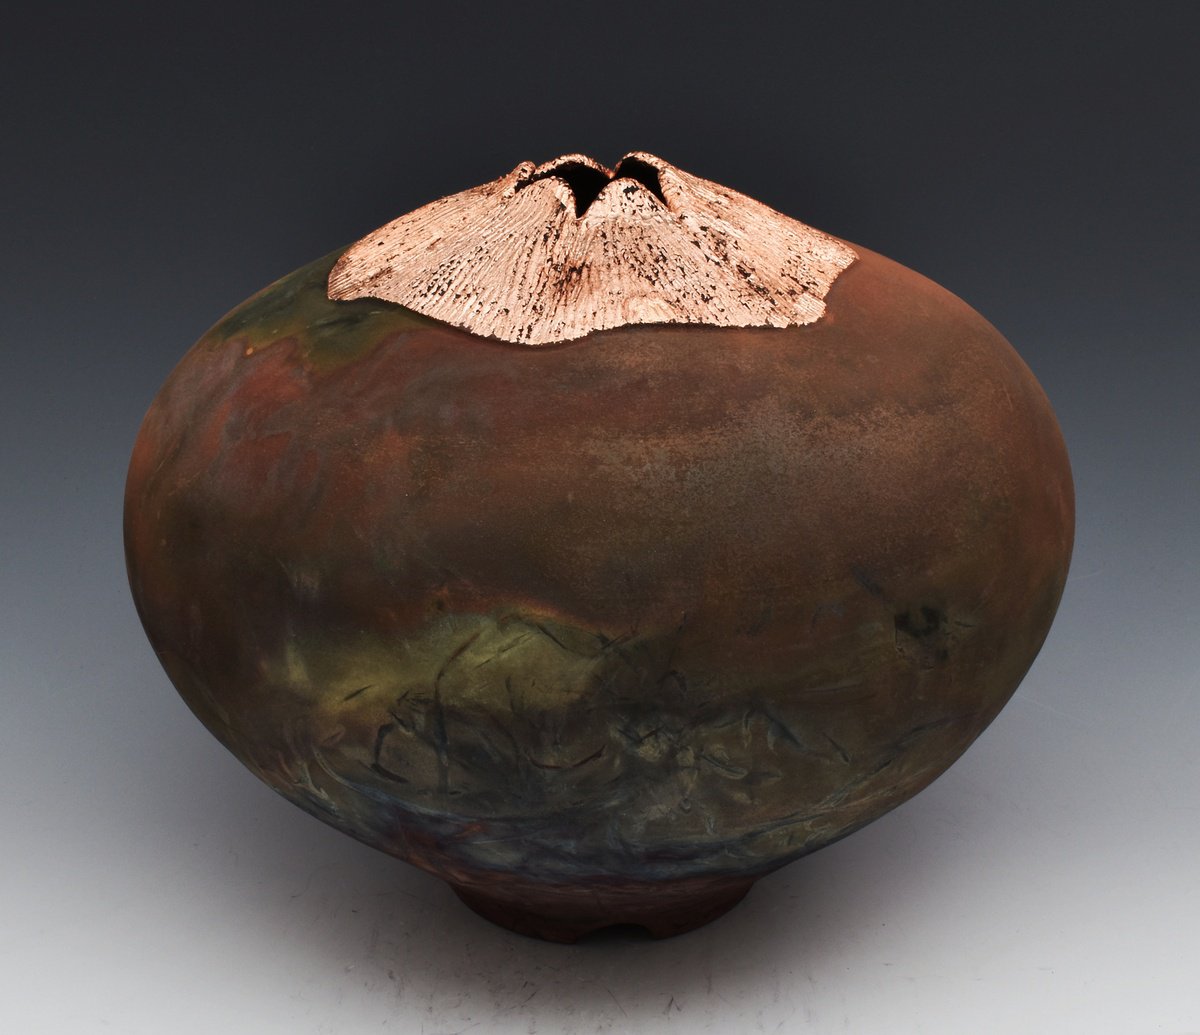 Stoneware vessel, raku fired, carved with copper leaf. one of a kind M611 by Ron Mello